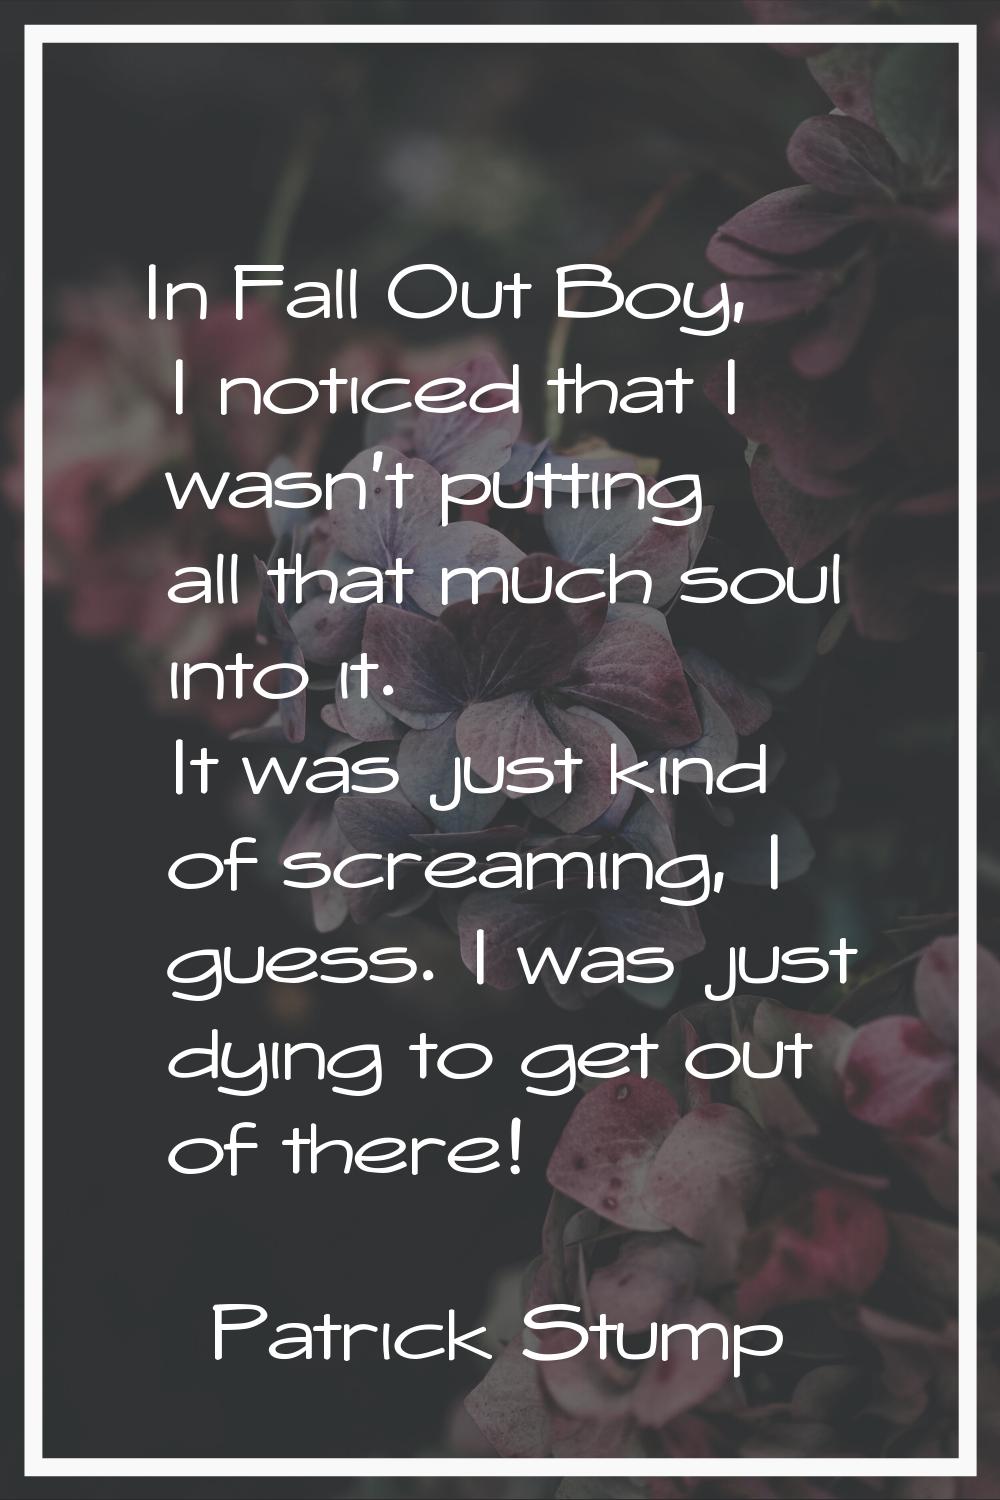 In Fall Out Boy, I noticed that I wasn't putting all that much soul into it. It was just kind of sc